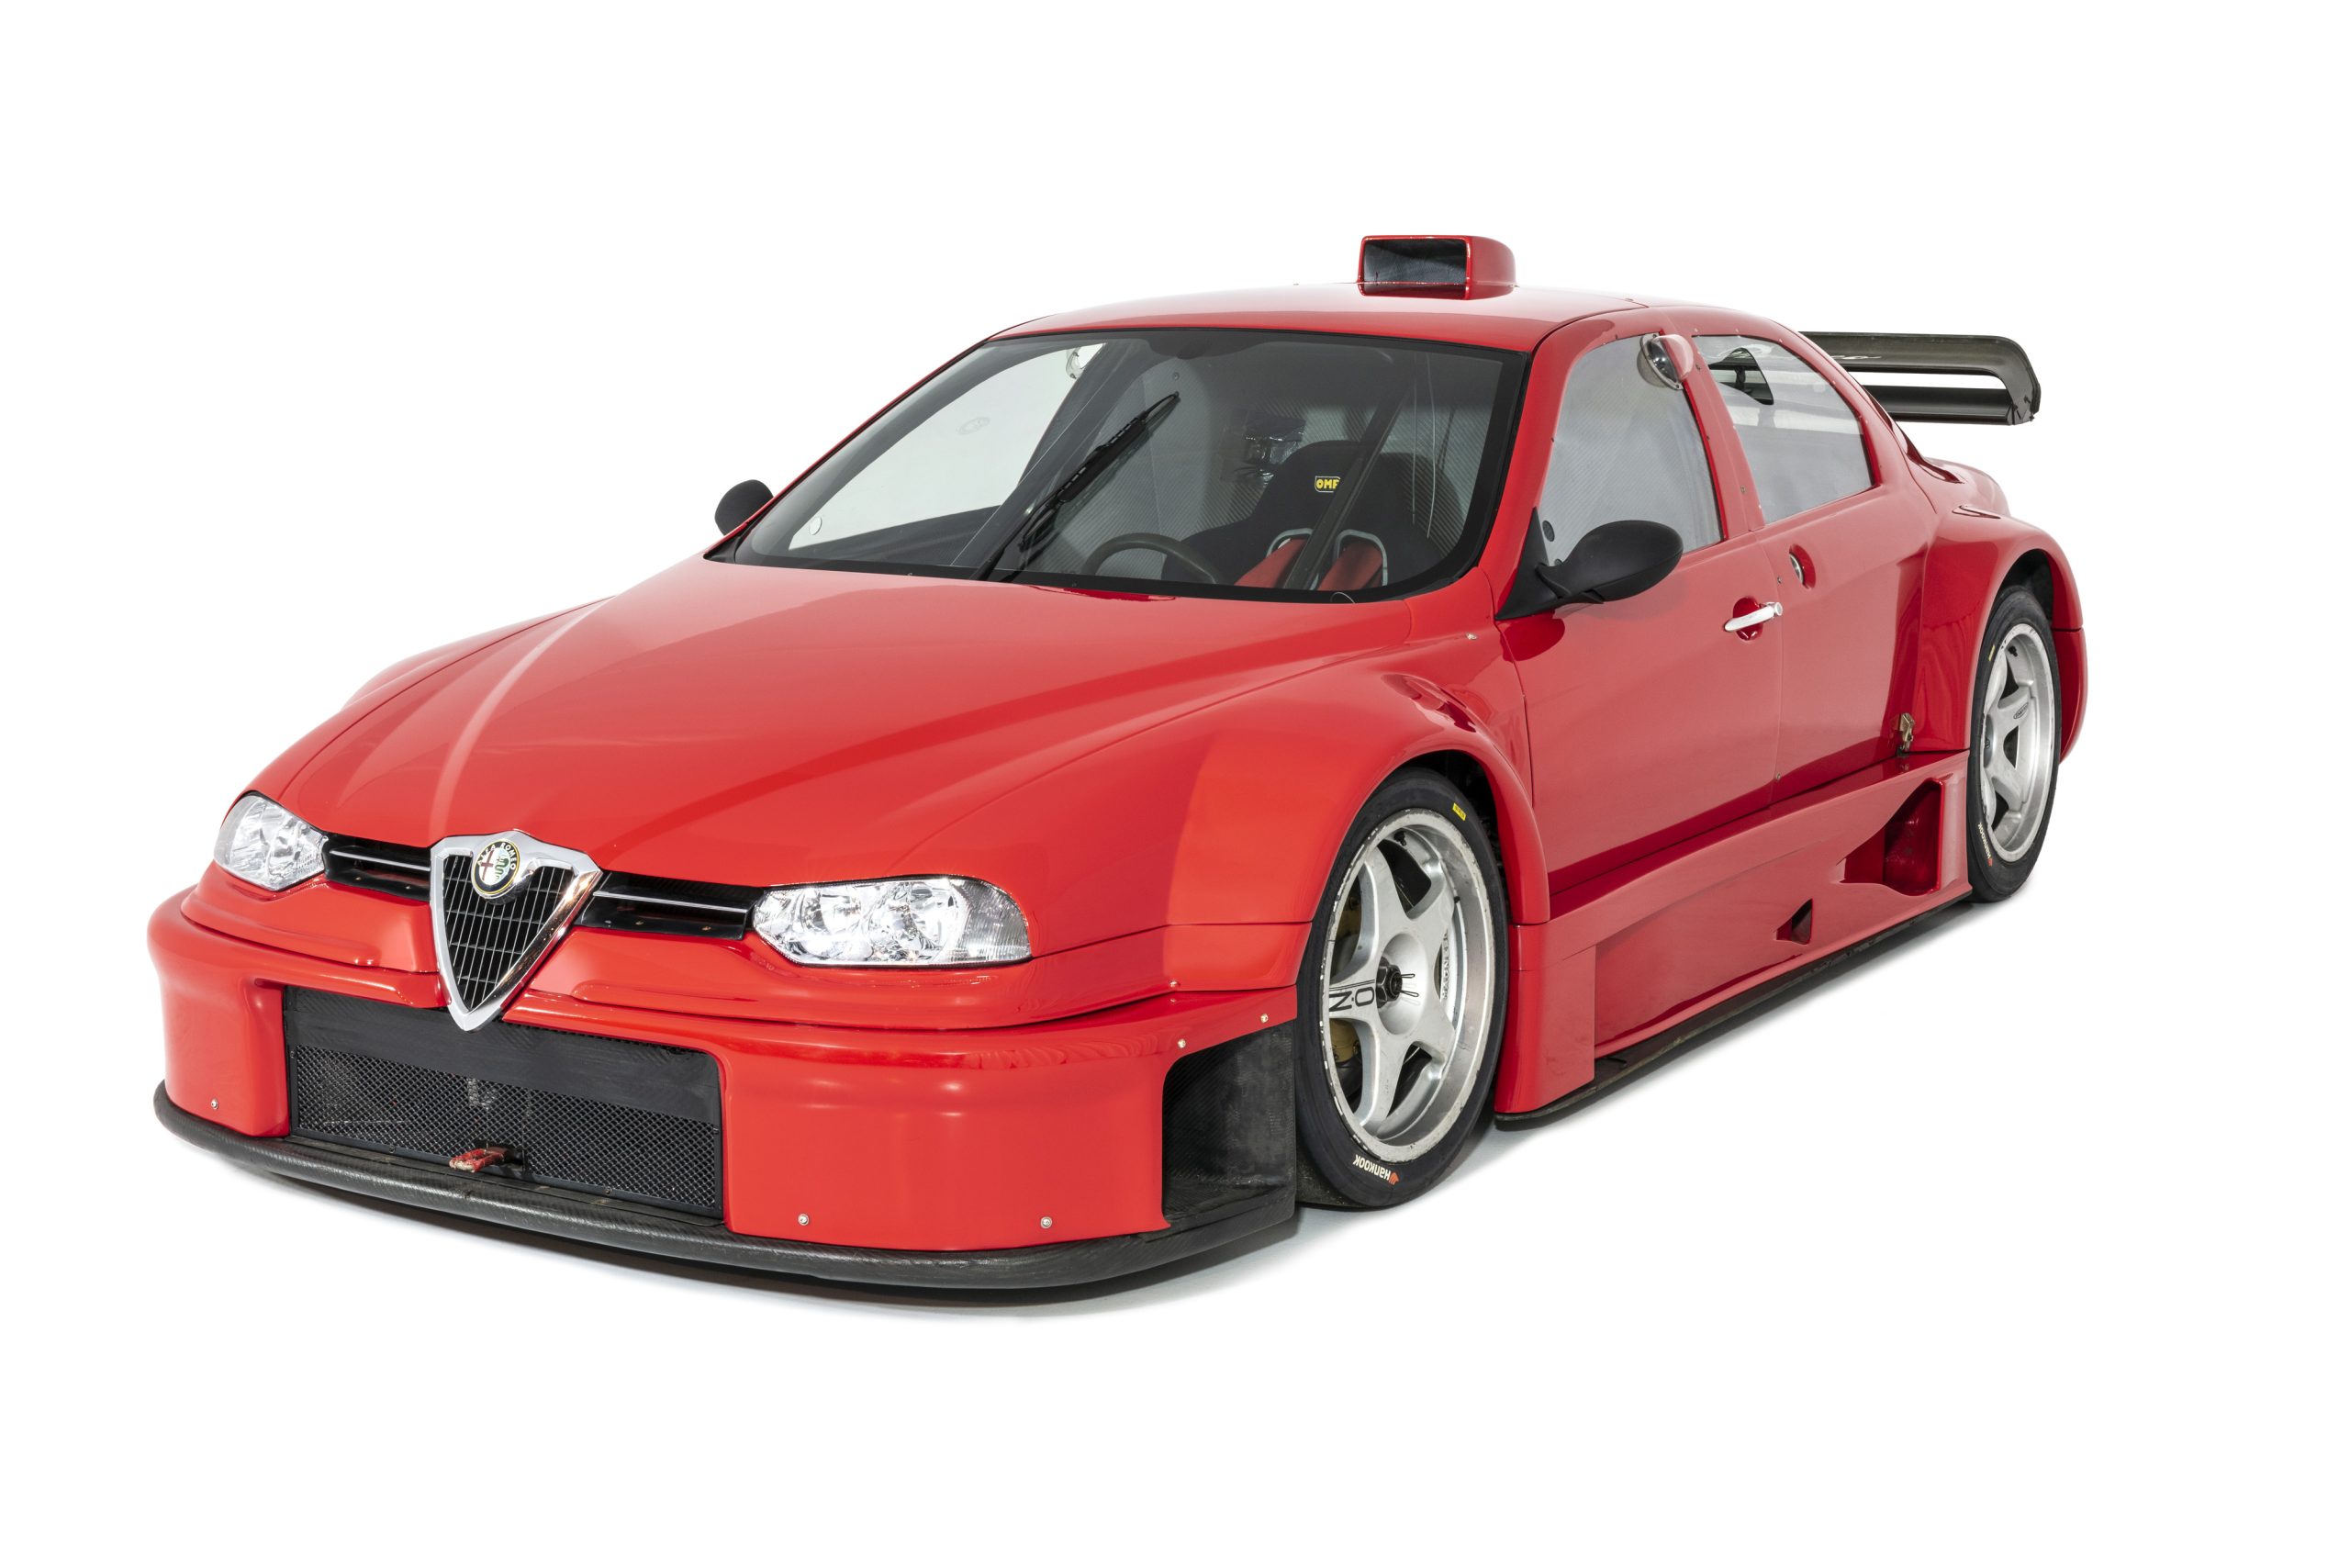 Pumped up! The Coloni S1 is an Alfa Romeo 156 on steroids